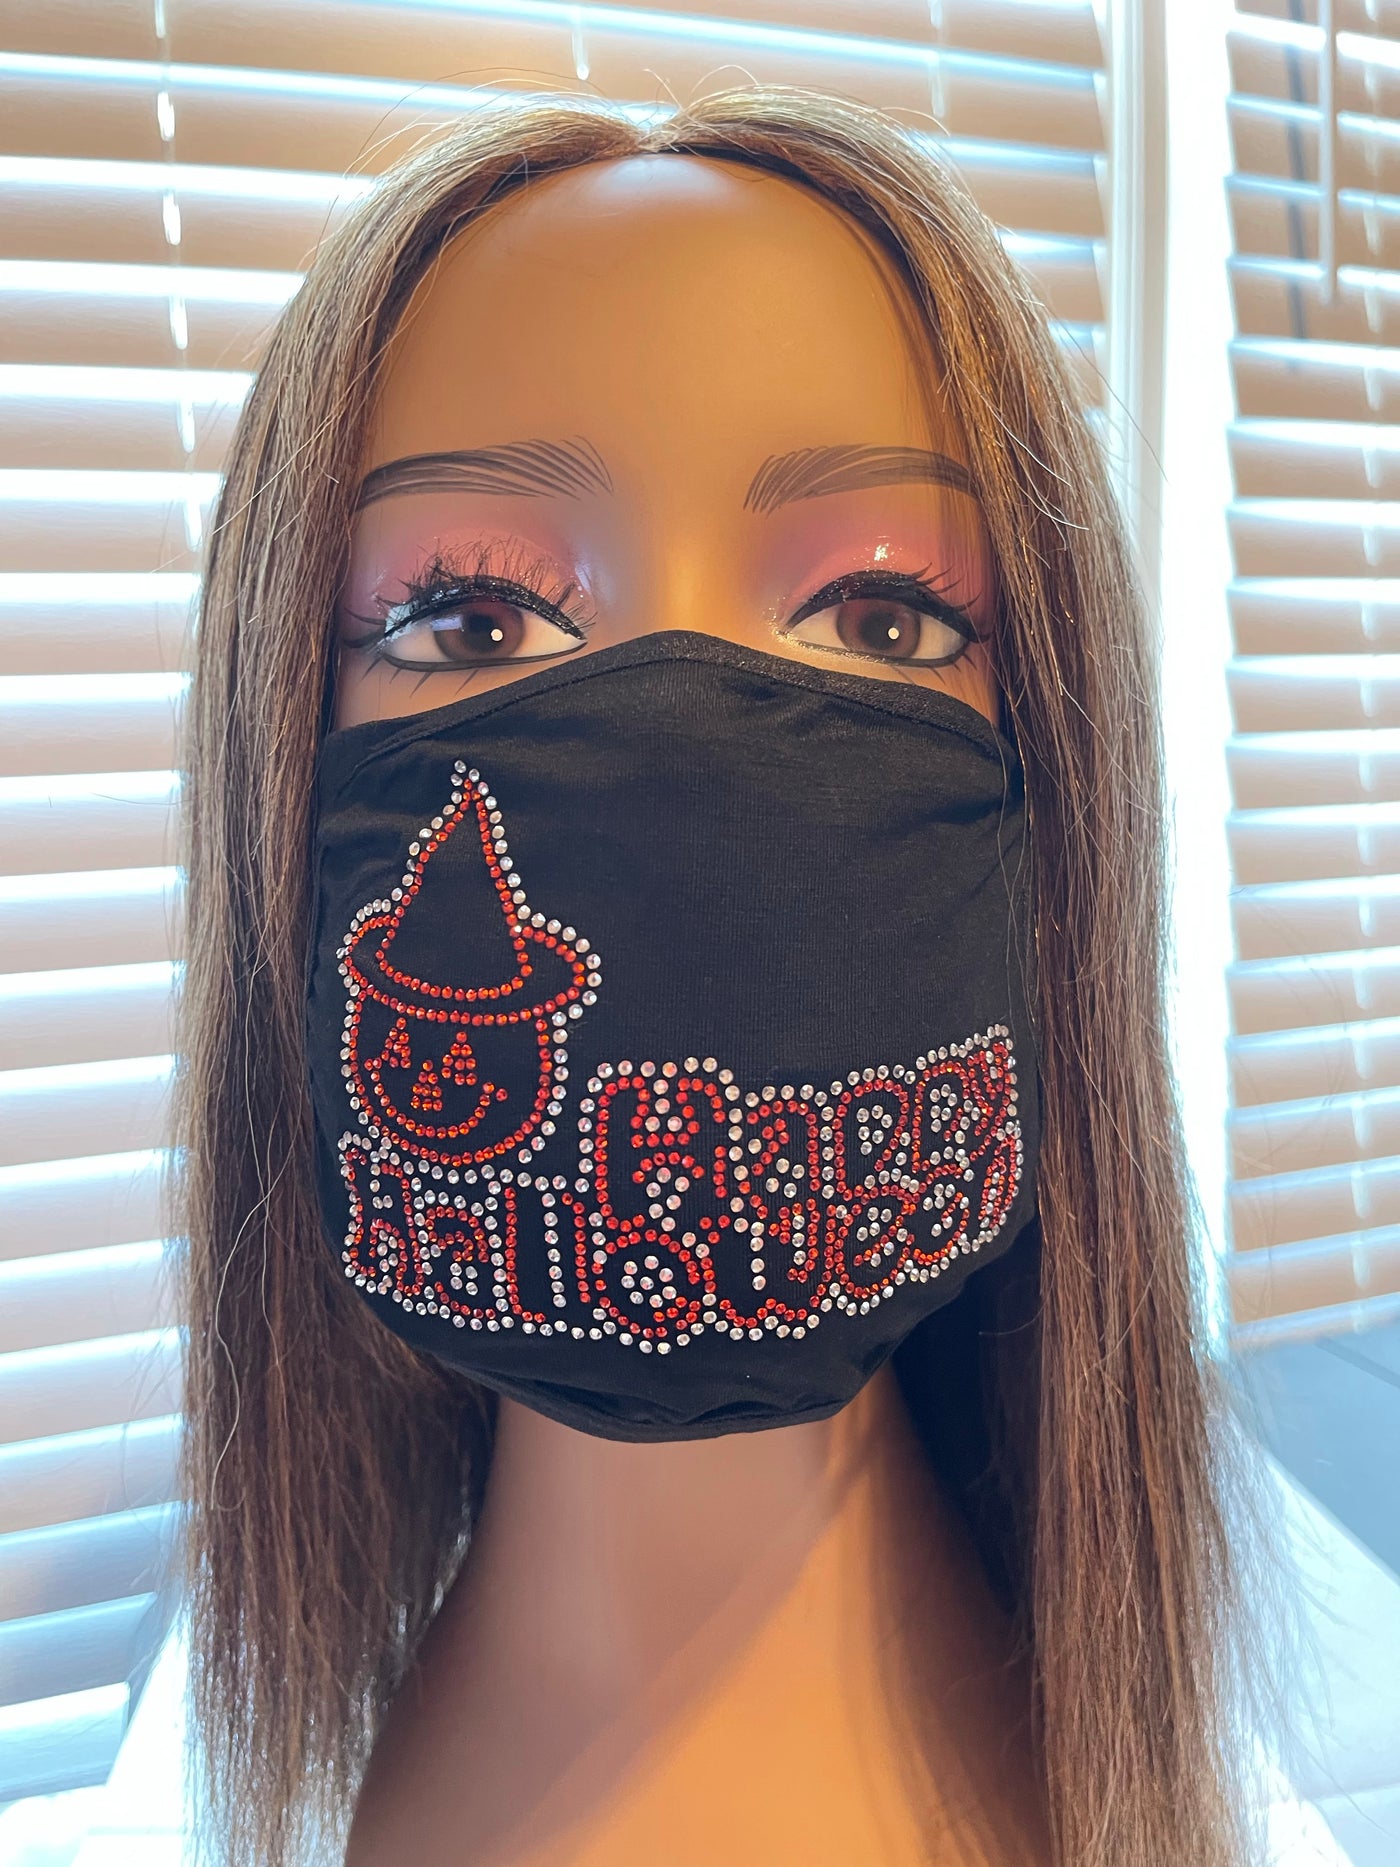 Halloween Bling Rhinestone Face Mask Filter Included